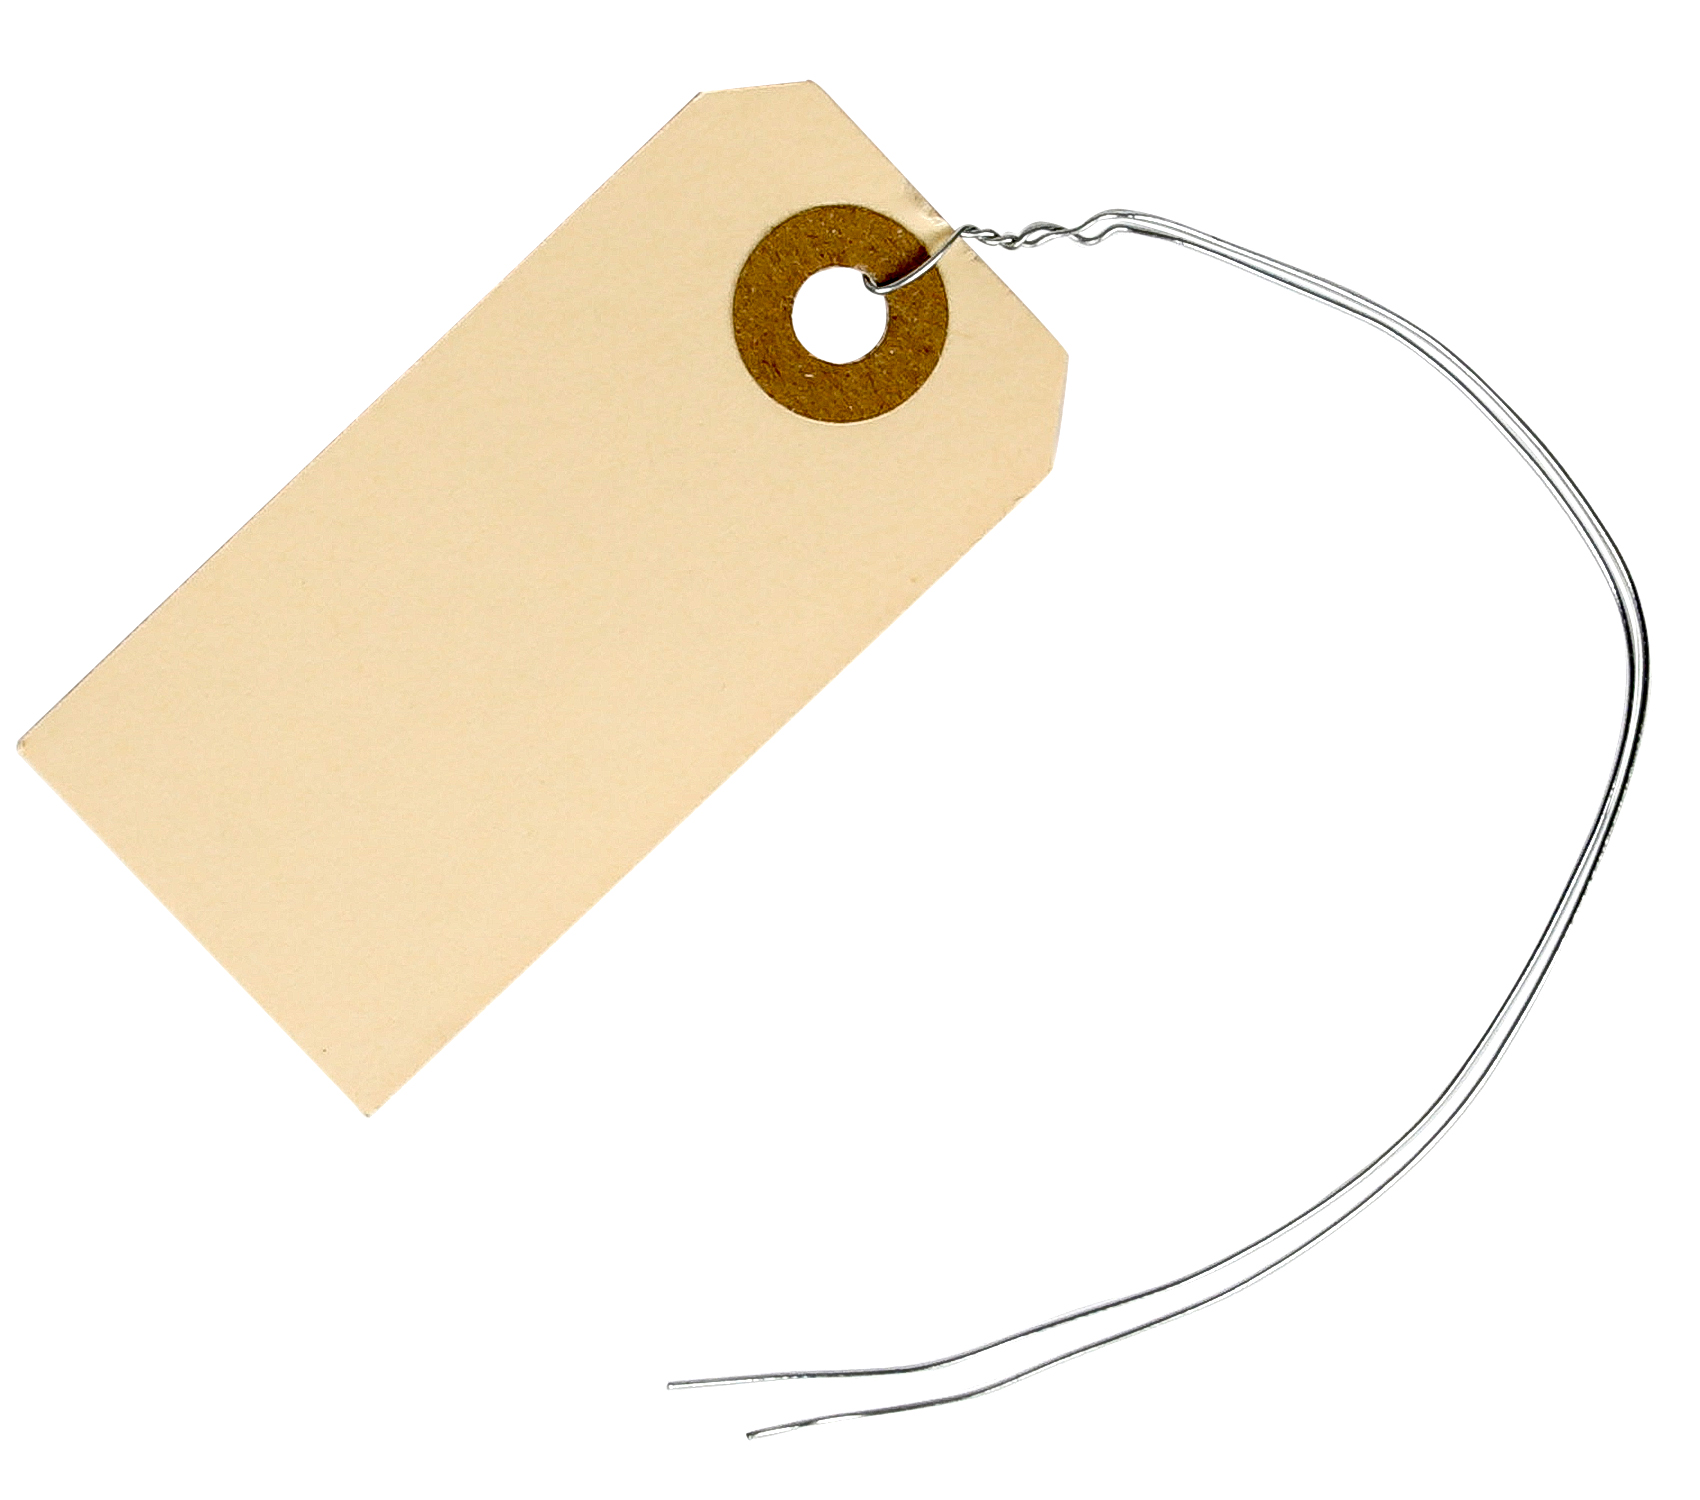 Manila Paper Tags #1 with Wire Attached, 2 3/4” x 1 3/8”, (Box of 250)  Blank Manila Paper Label Tags with Metal String and Reinforced Hole - EZDOM  Tags